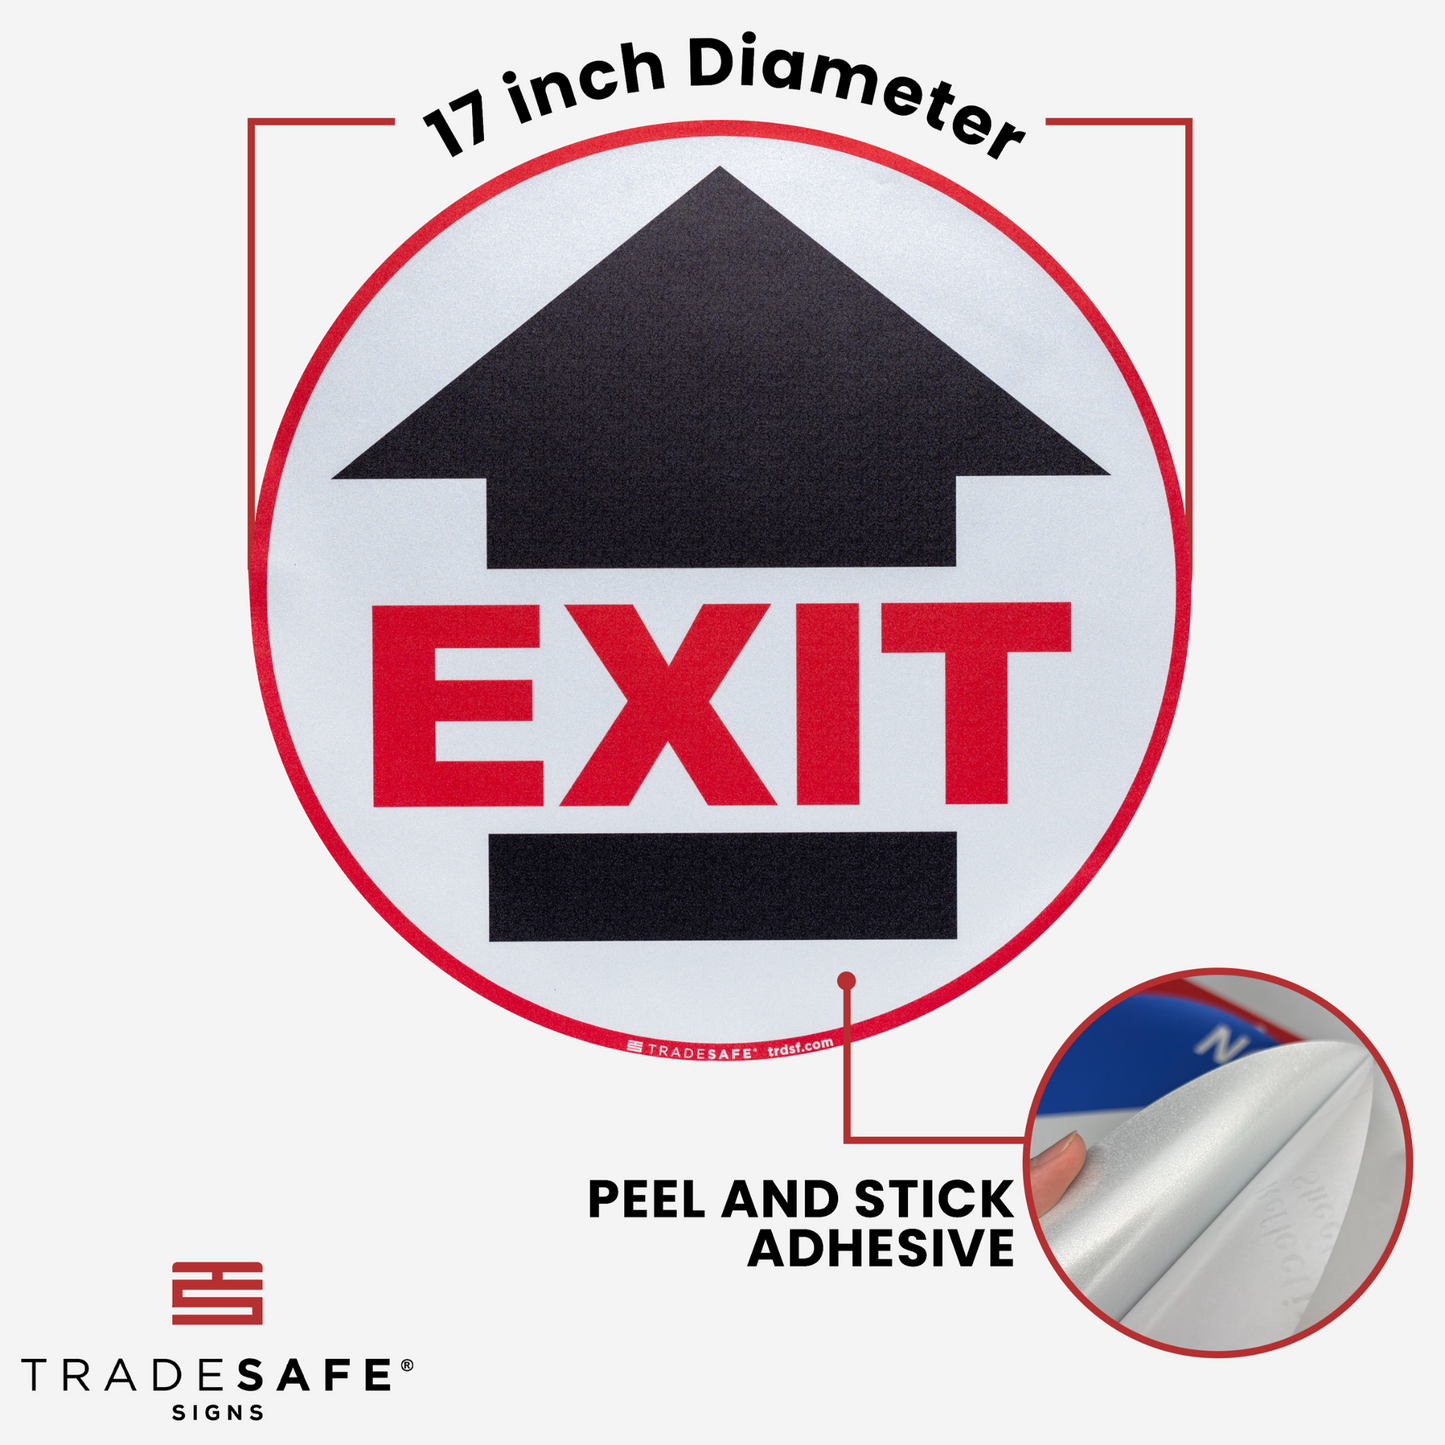 dimensions of exit sign